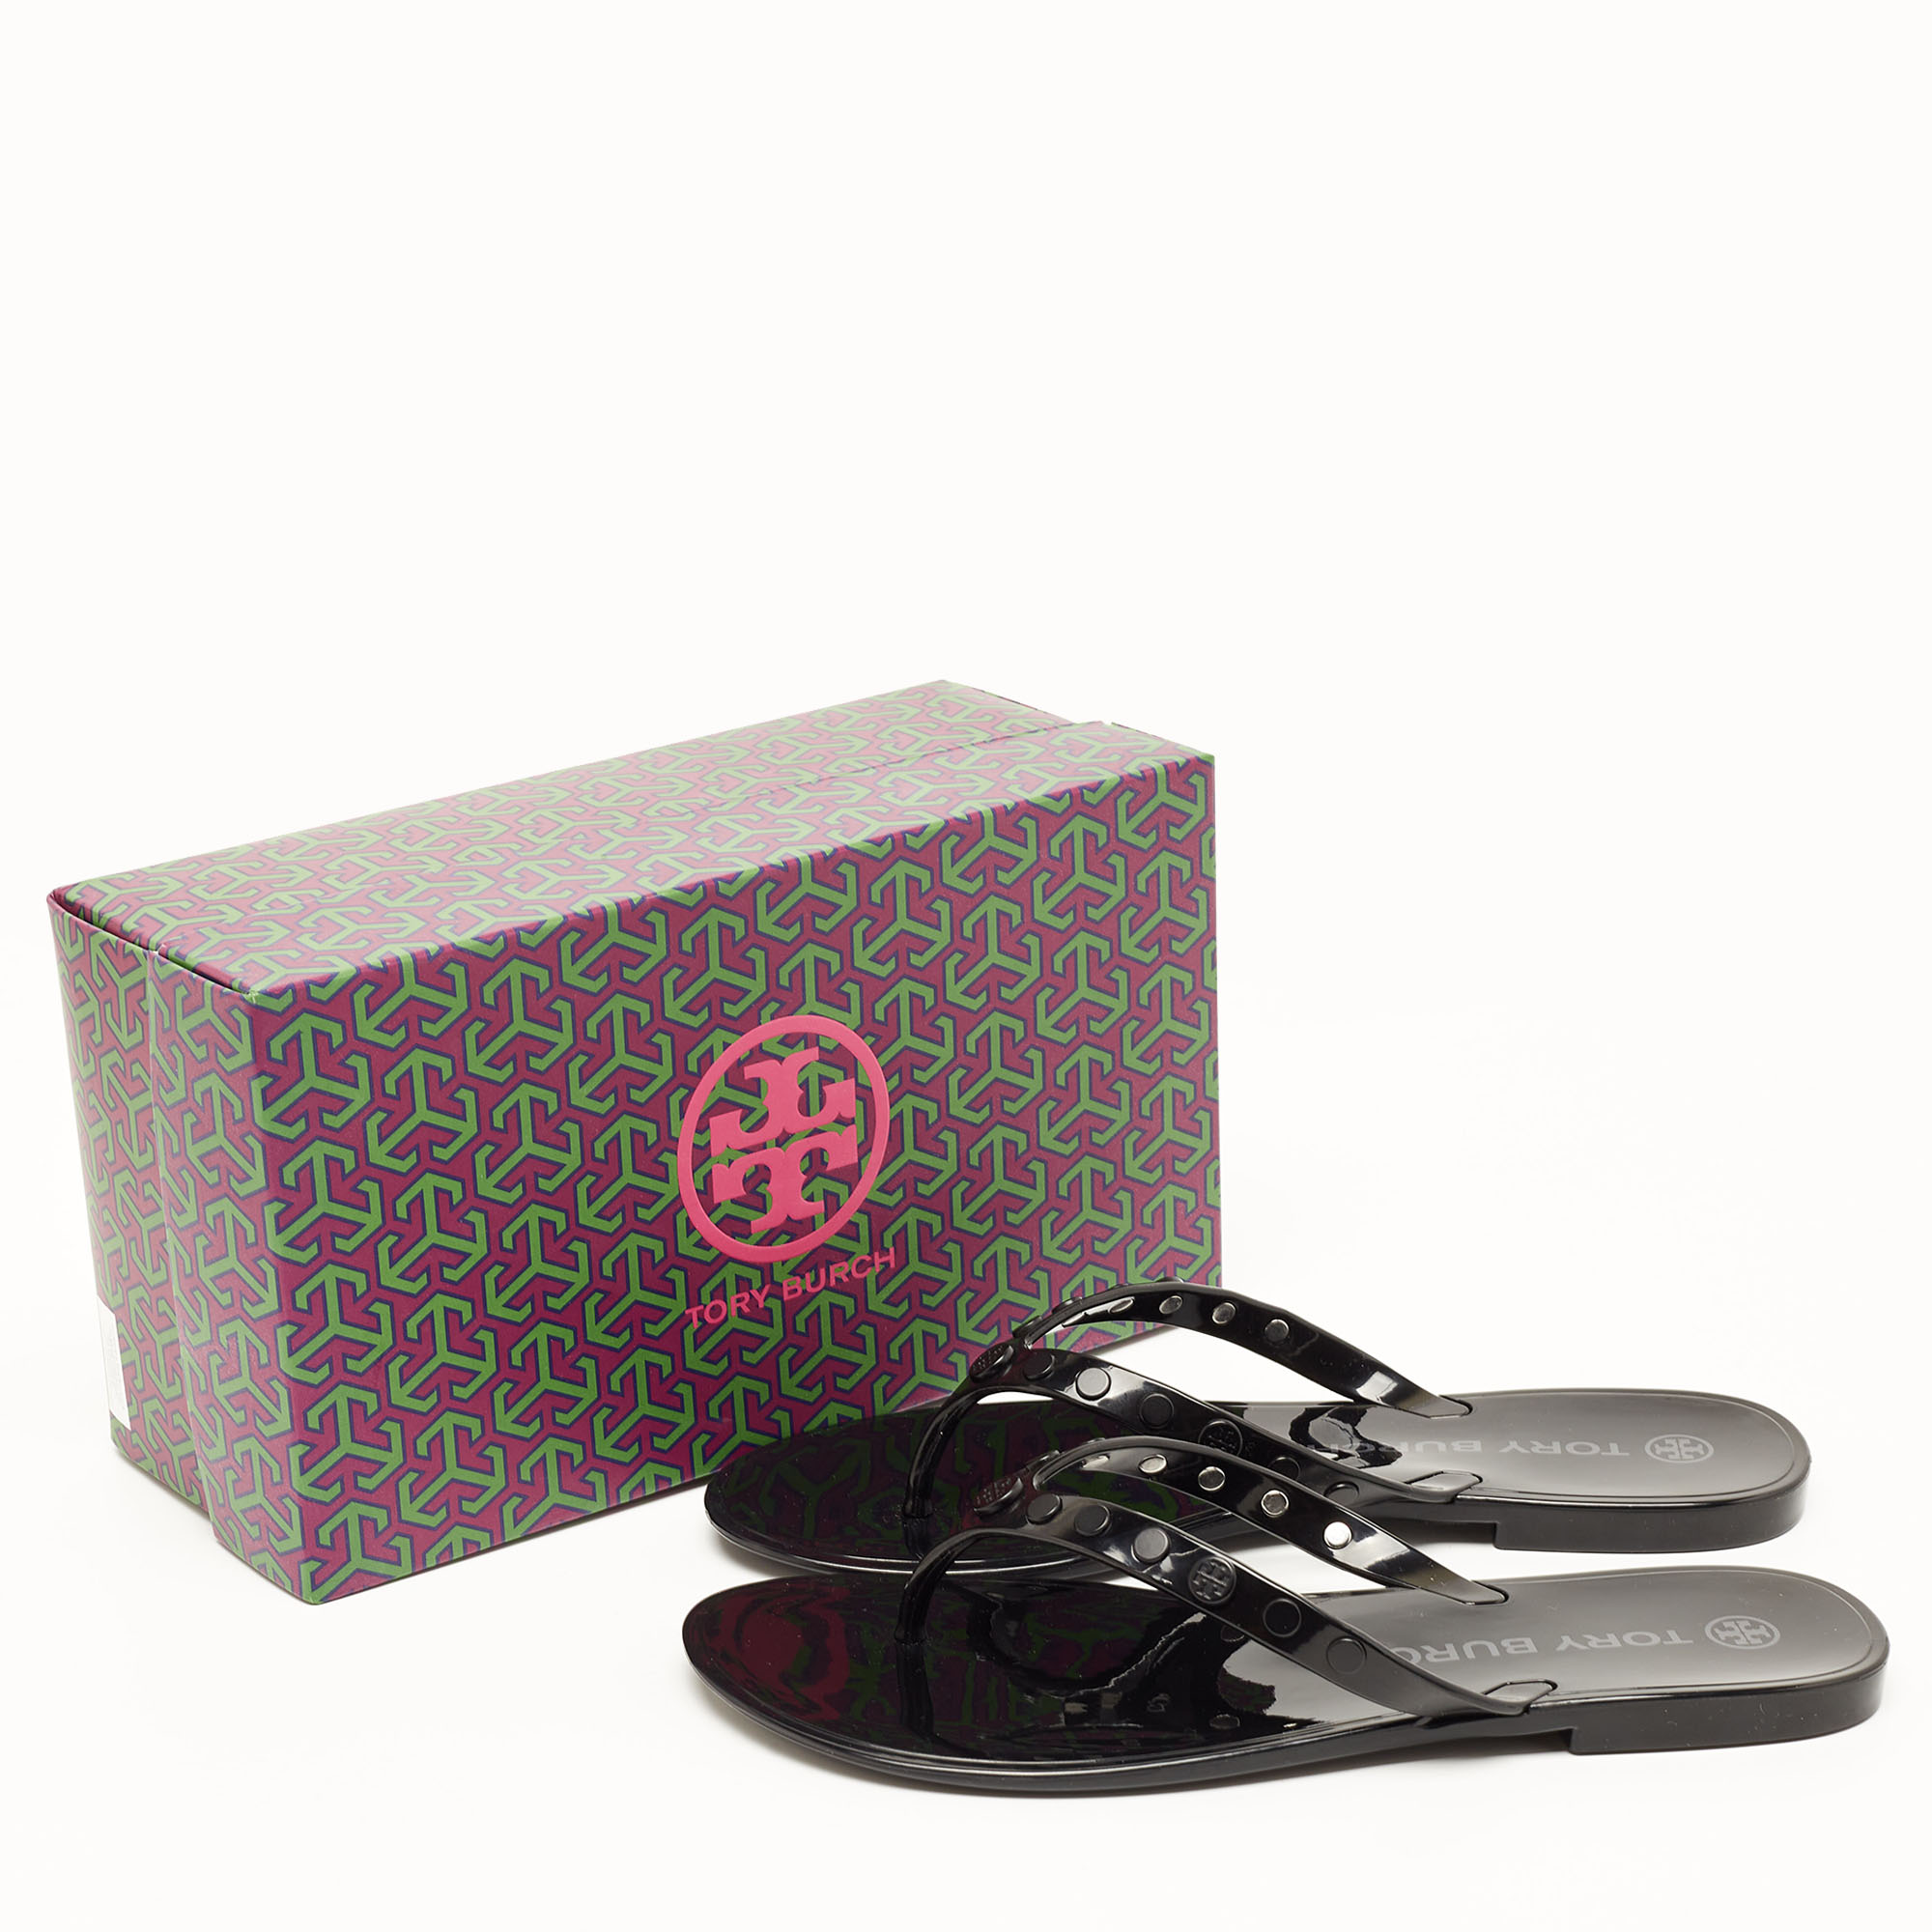 Tory Burch Black Rubber Studded Thong Flats Size 38.5